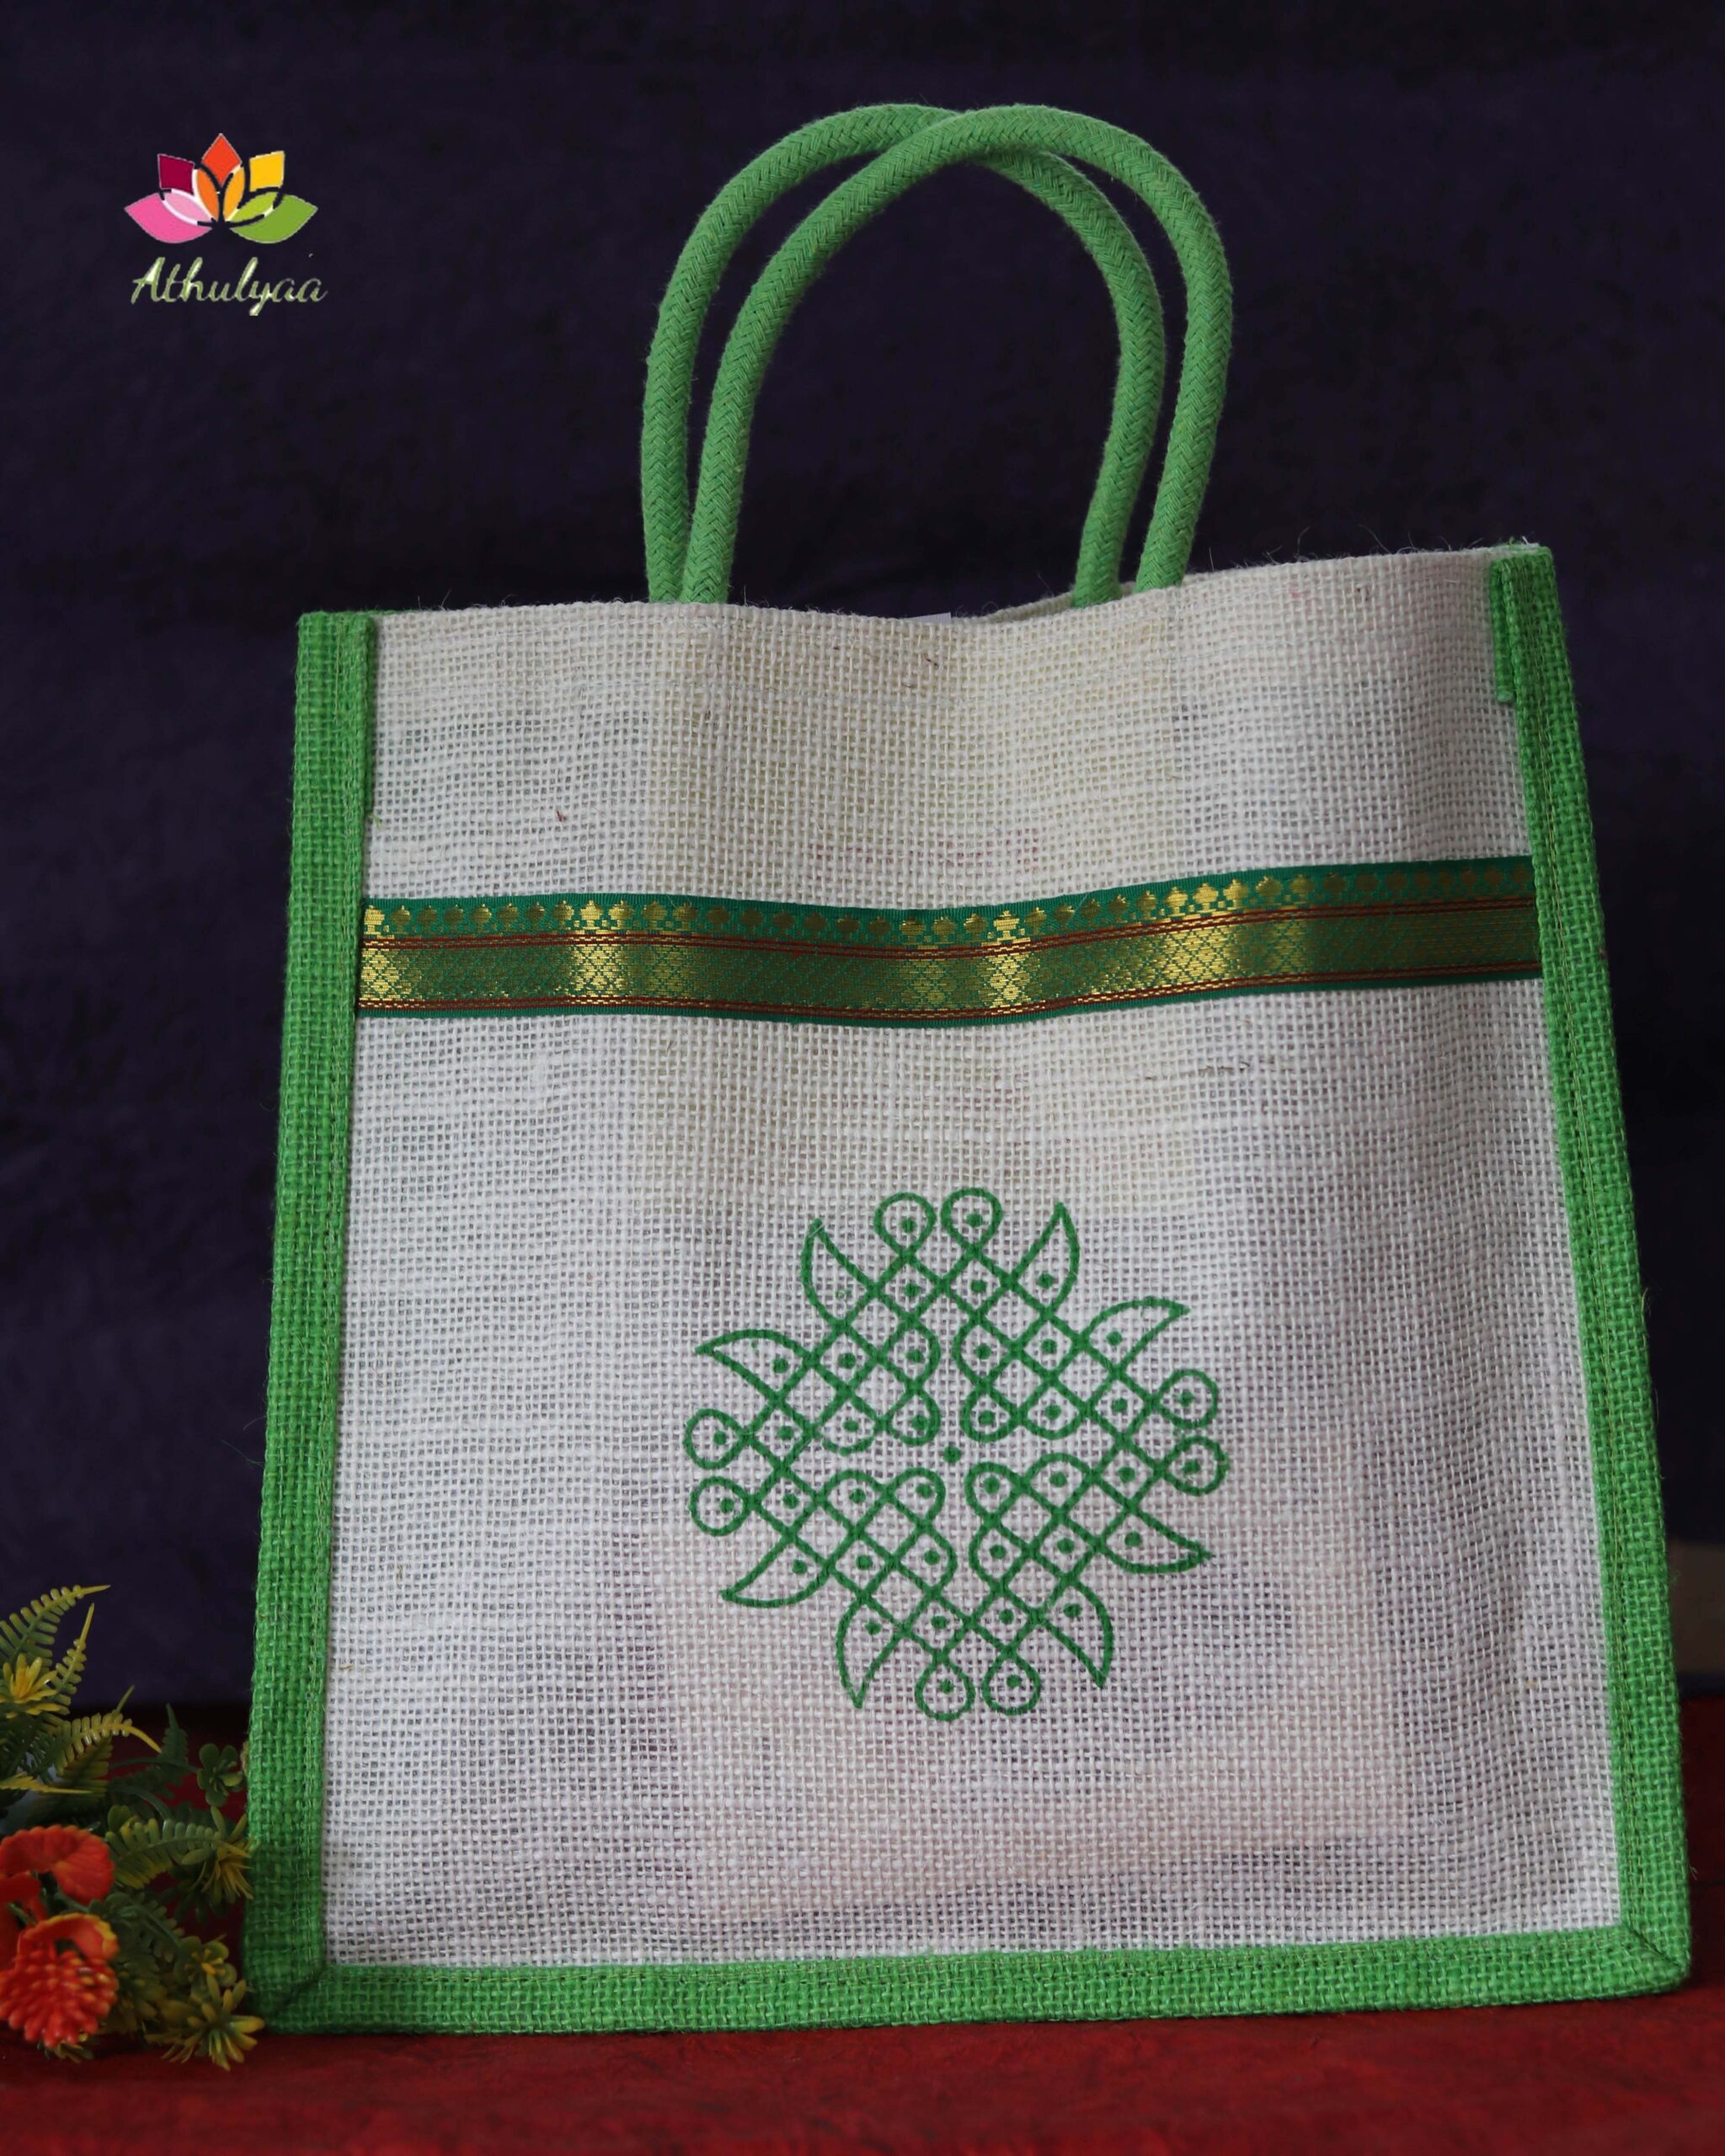 Jute handbag, Handmade Indian Jute Tote Bag, Reusable Carry Bag, tiffin bag,  Ikat Printed, Eco-Friendly Tote, Shopper Bag with handle, Waterproof, With  Inner Compartments – ZIP, BOTTLE HOLDER, Anchor